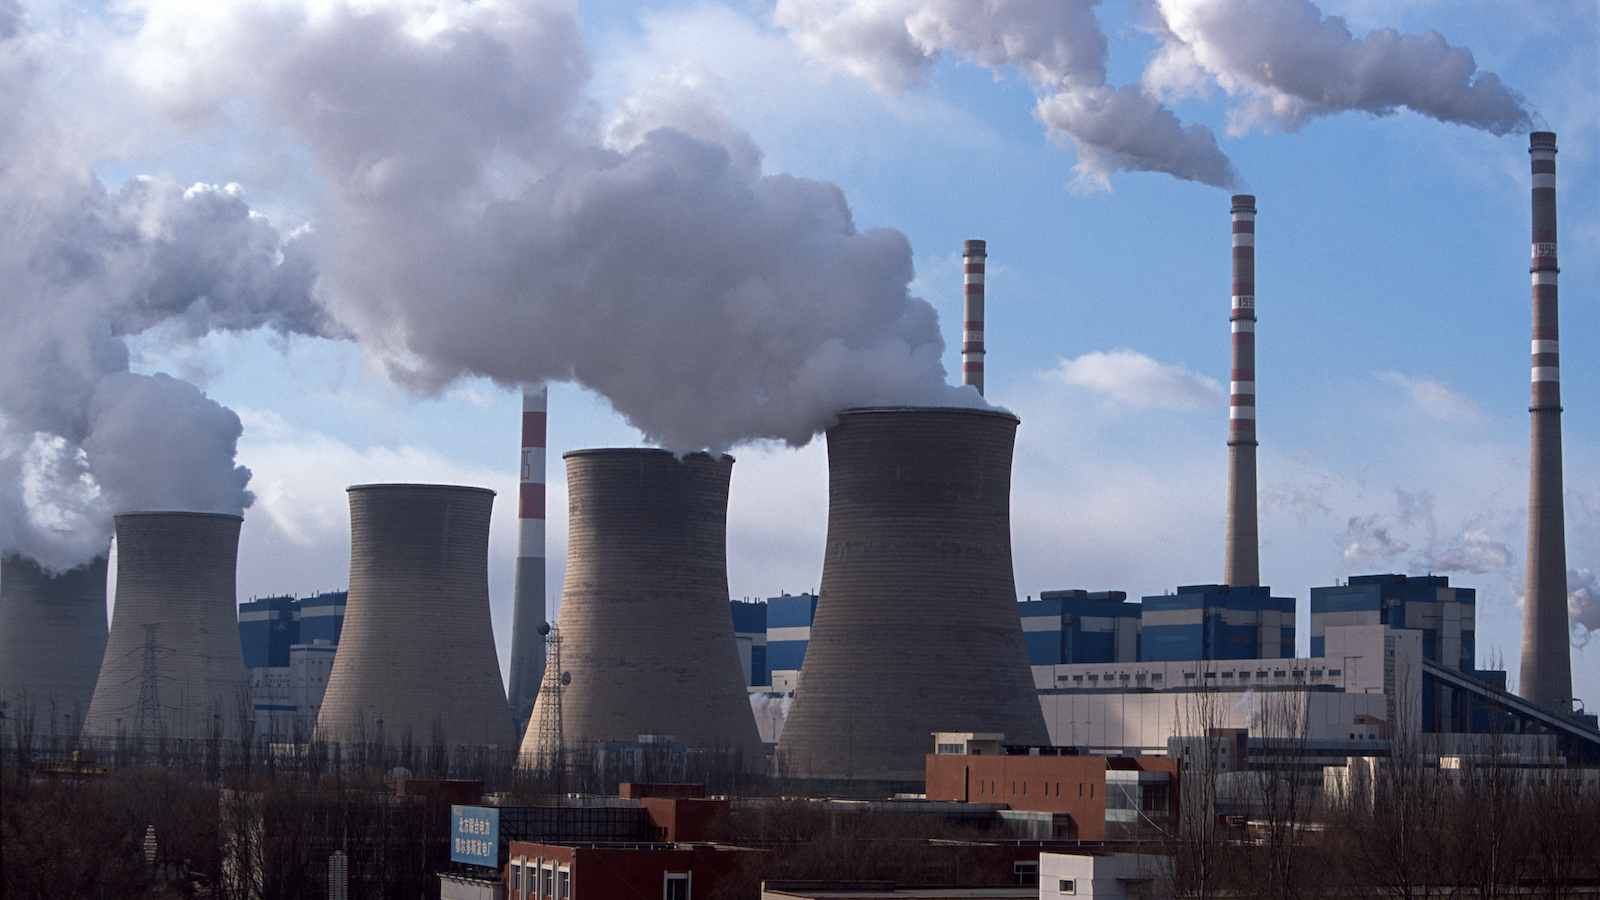 Emissions come from a coal-fired power plant